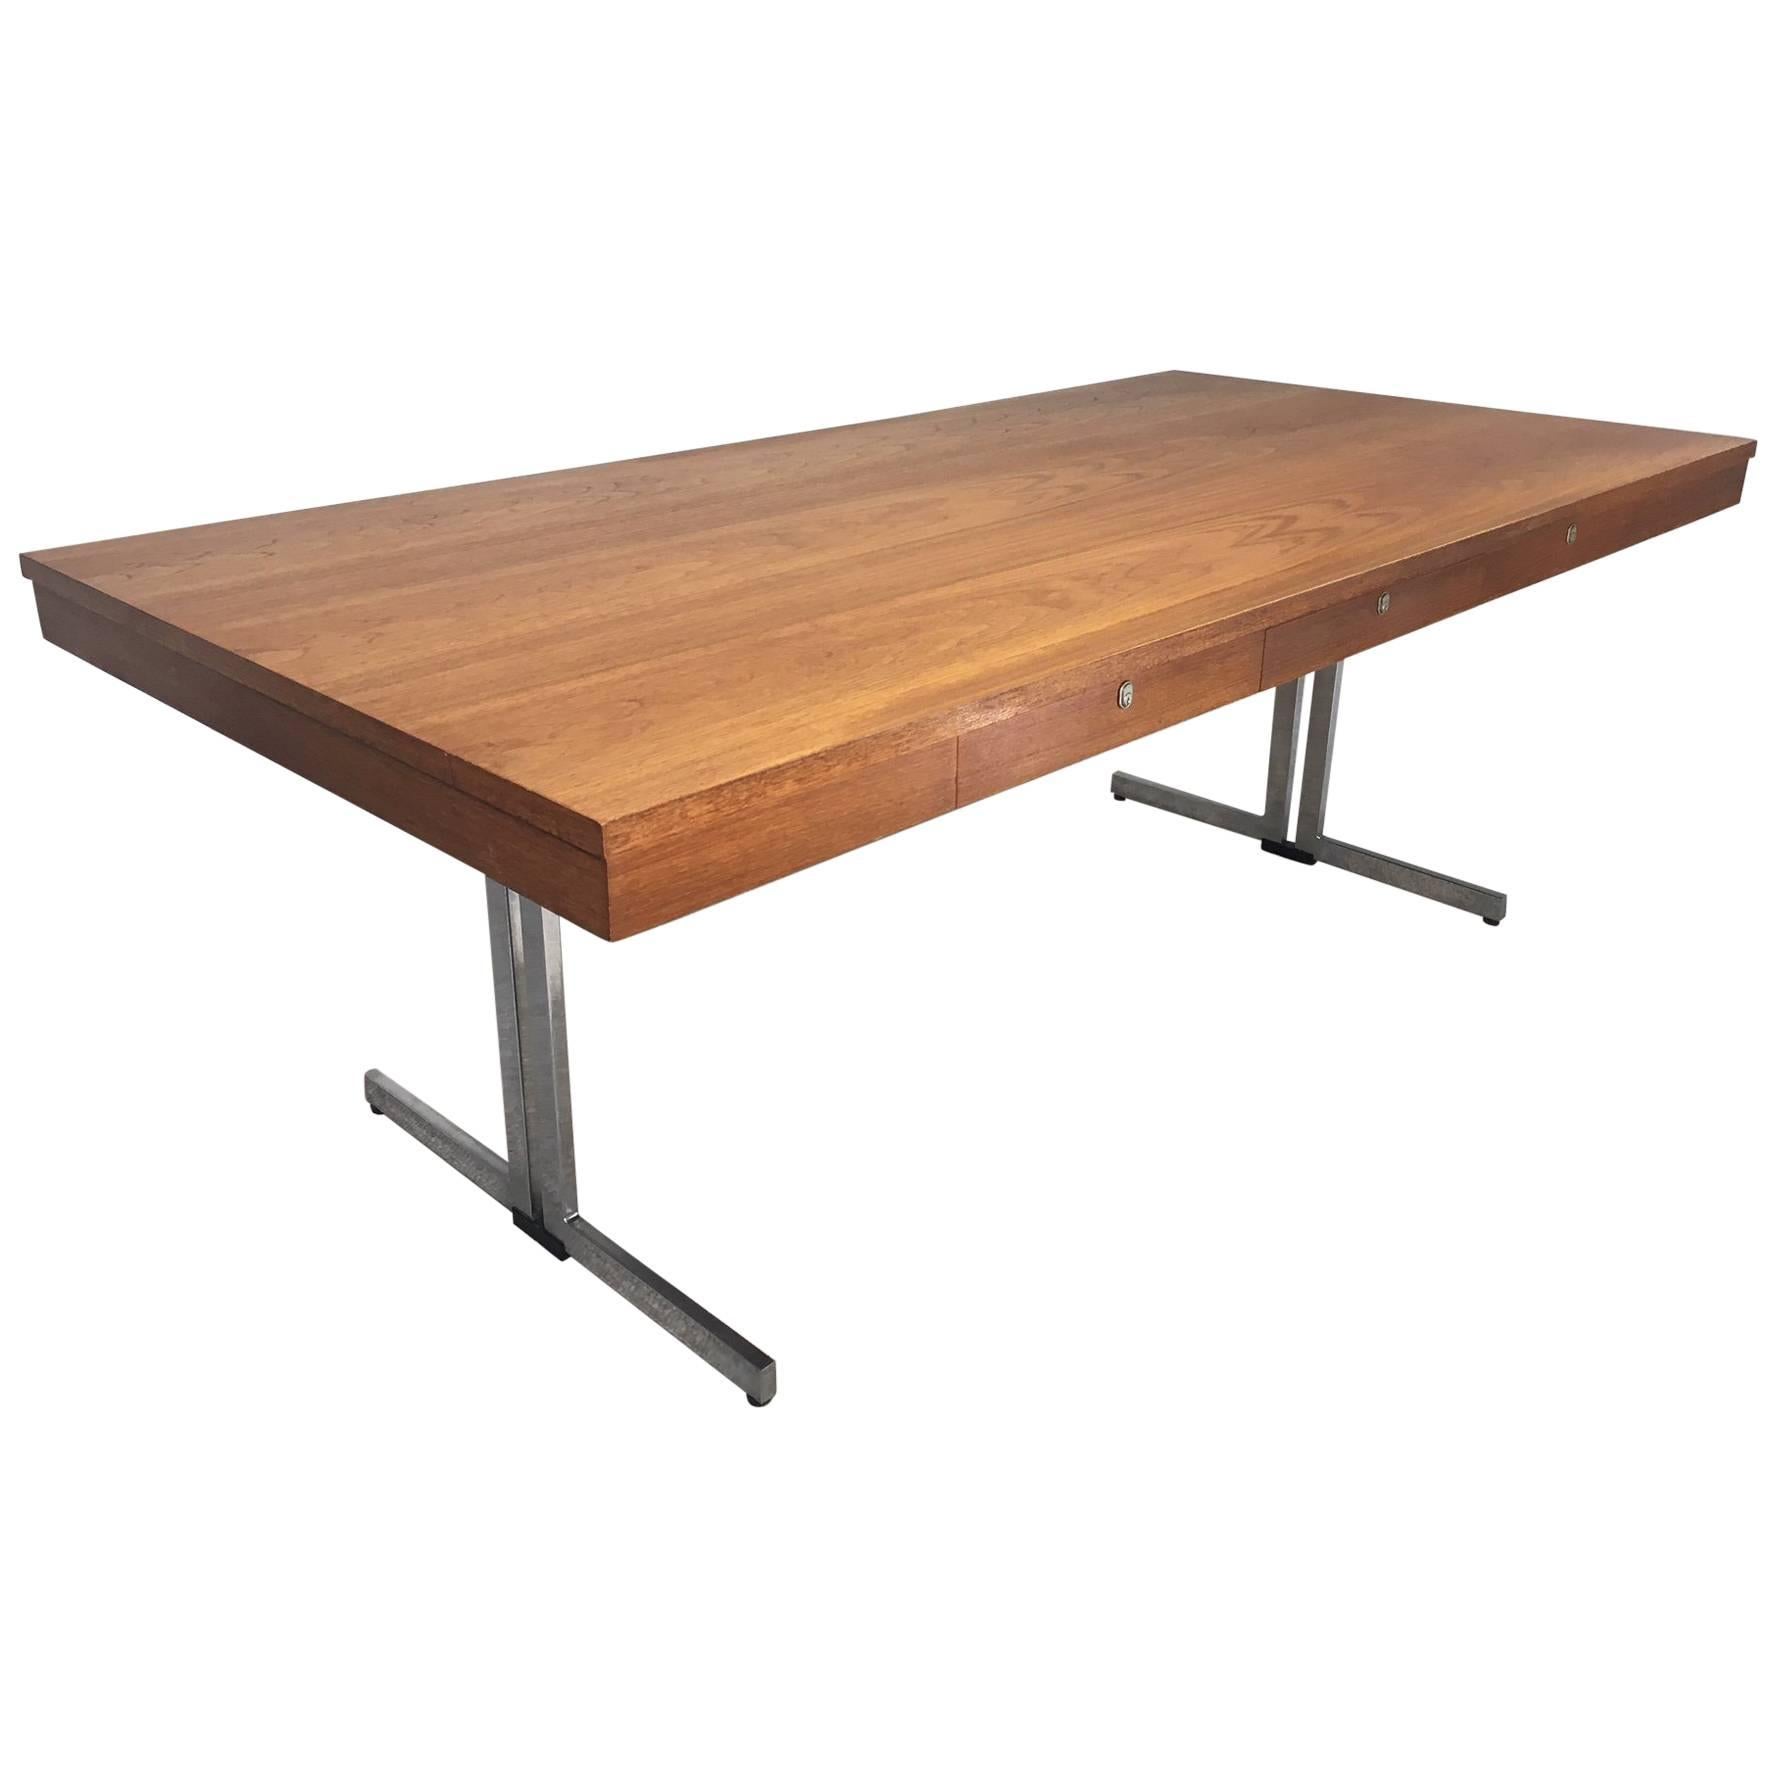 Midcentury Executive Desk Attributed to Walter Knoll Germany, circa 1960